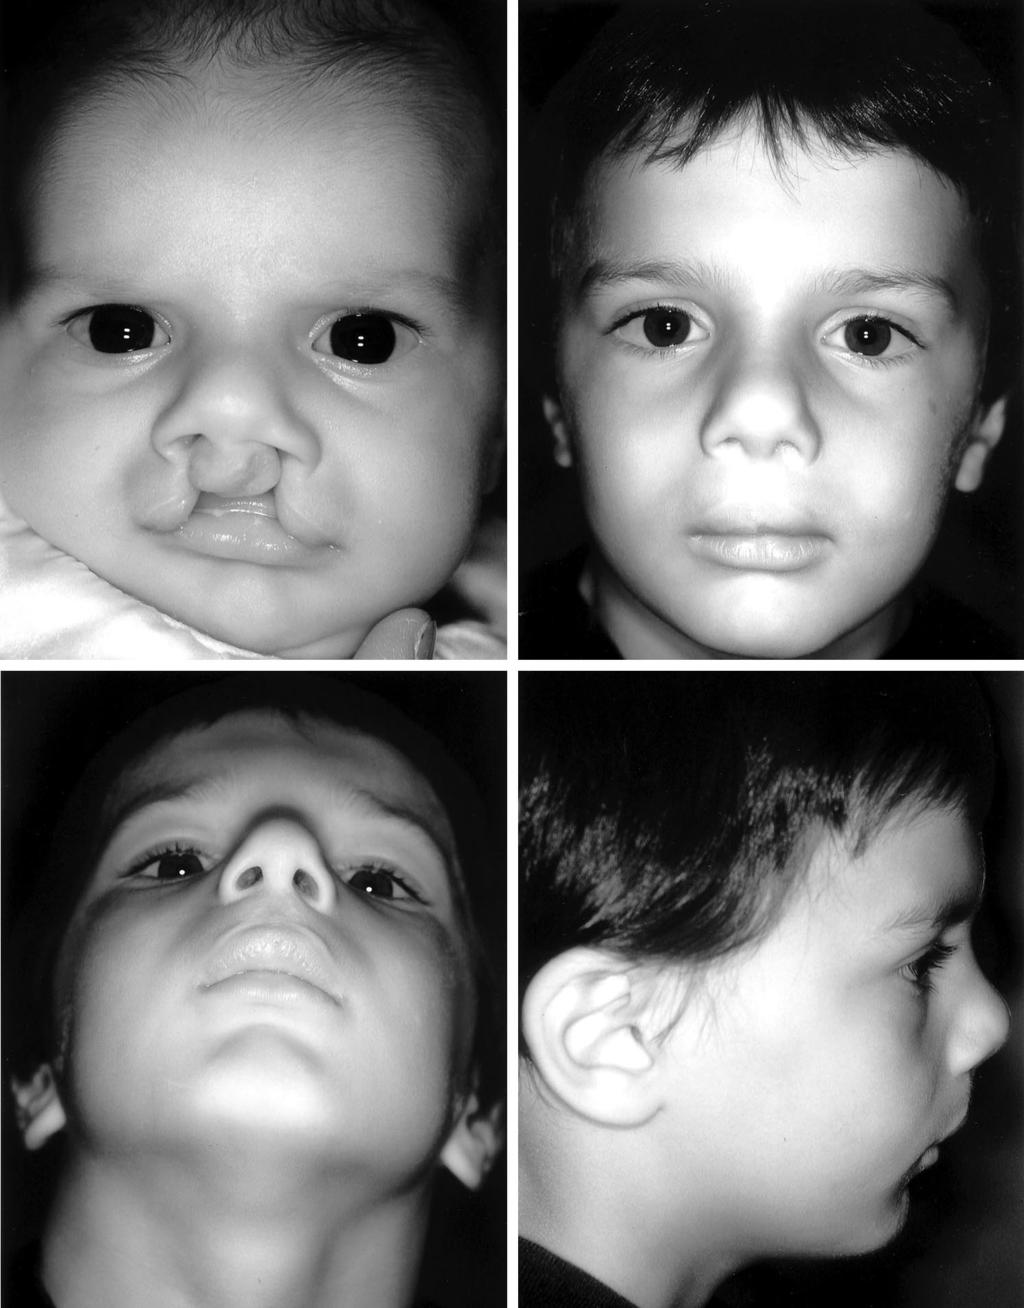 188 PLASTIC AND RECONSTRUCTIVE SURGERY, July 2001 FIG. 4.(Above, left) Newborn with bilateral cleft lip, right cutaneous band, and intact right alveolus and secondary palate.